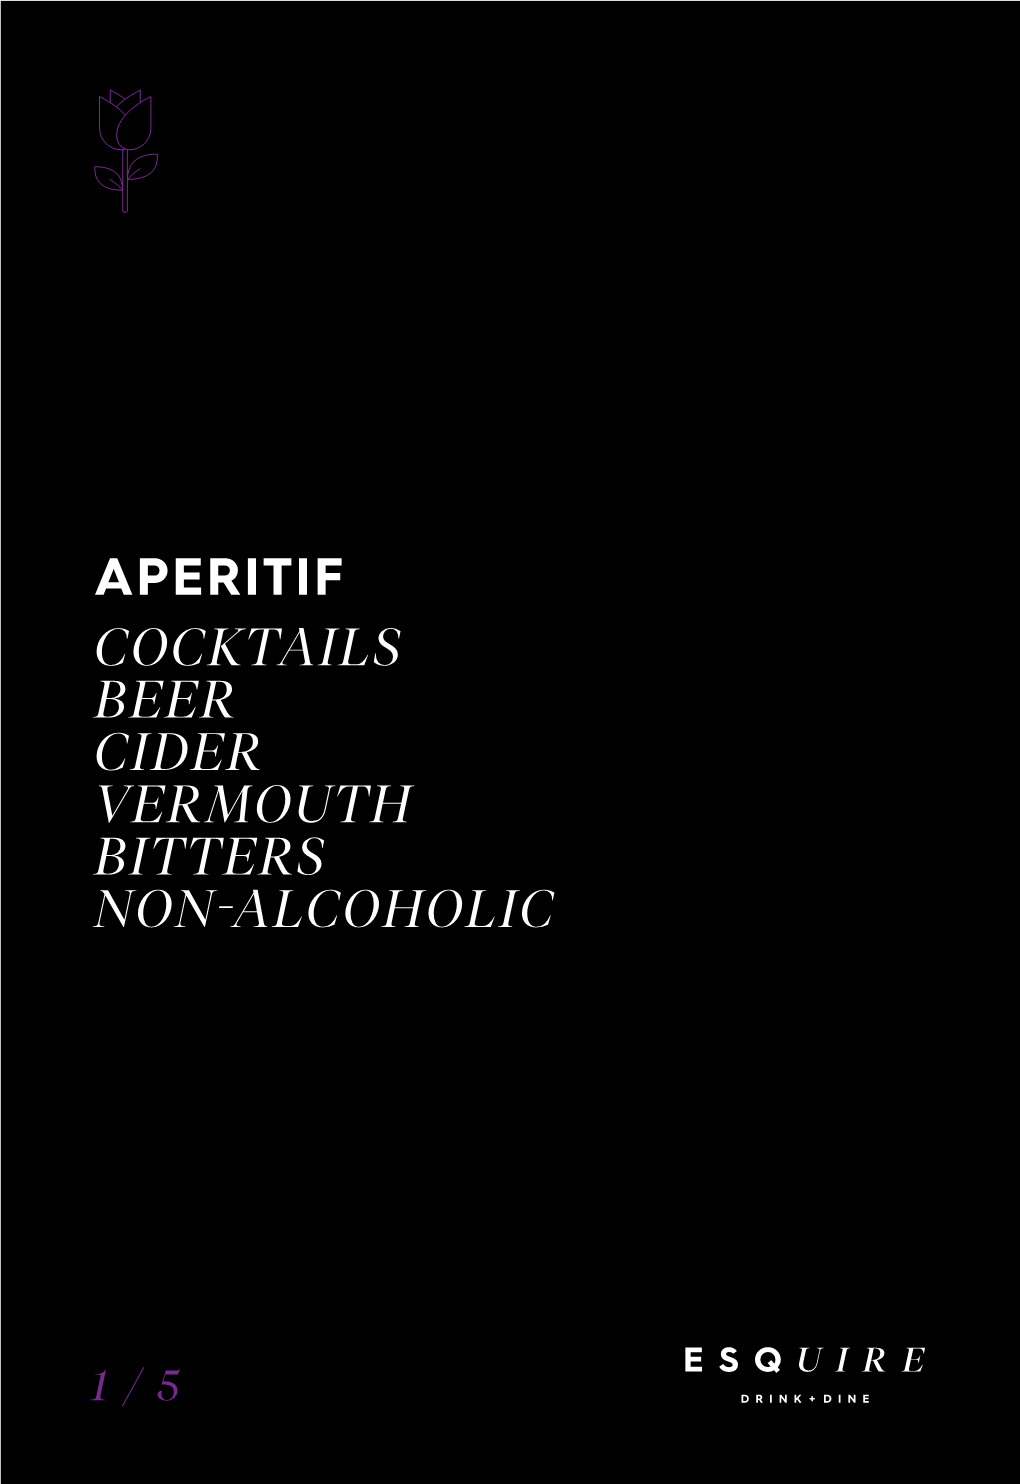 Aperitif Cocktails Beer Cider Vermouth Bitters Non-Alcoholic